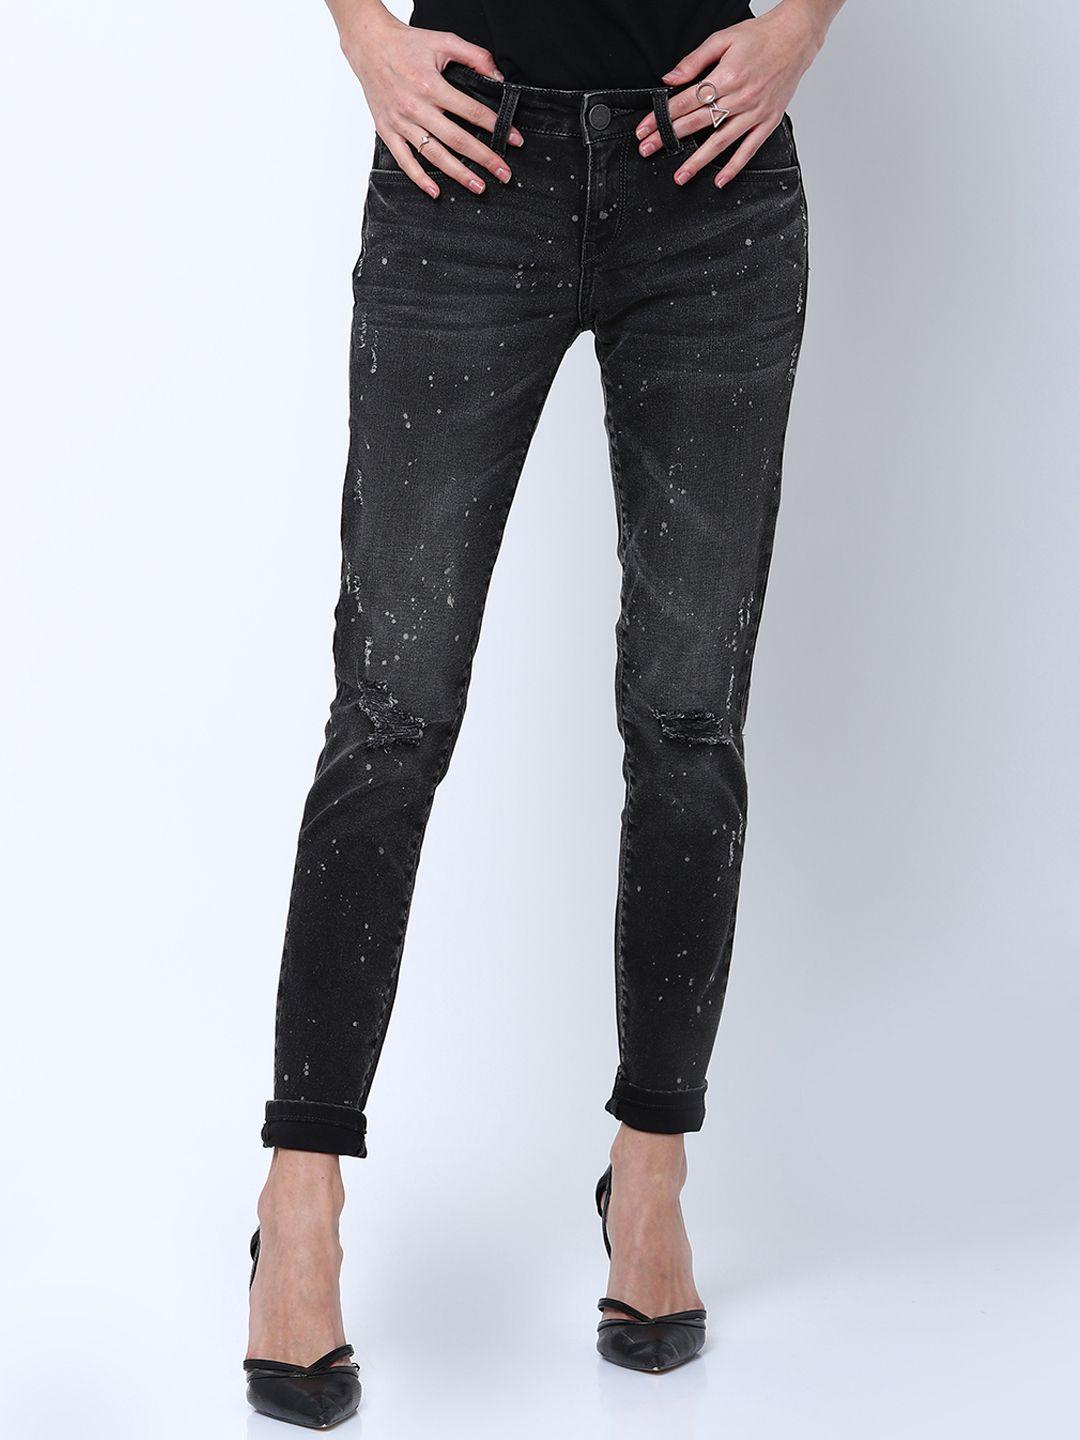 tokyo-talkies-women-charcoal-super-skinny-fit-mid-rise-low-distress-stretchable-jeans